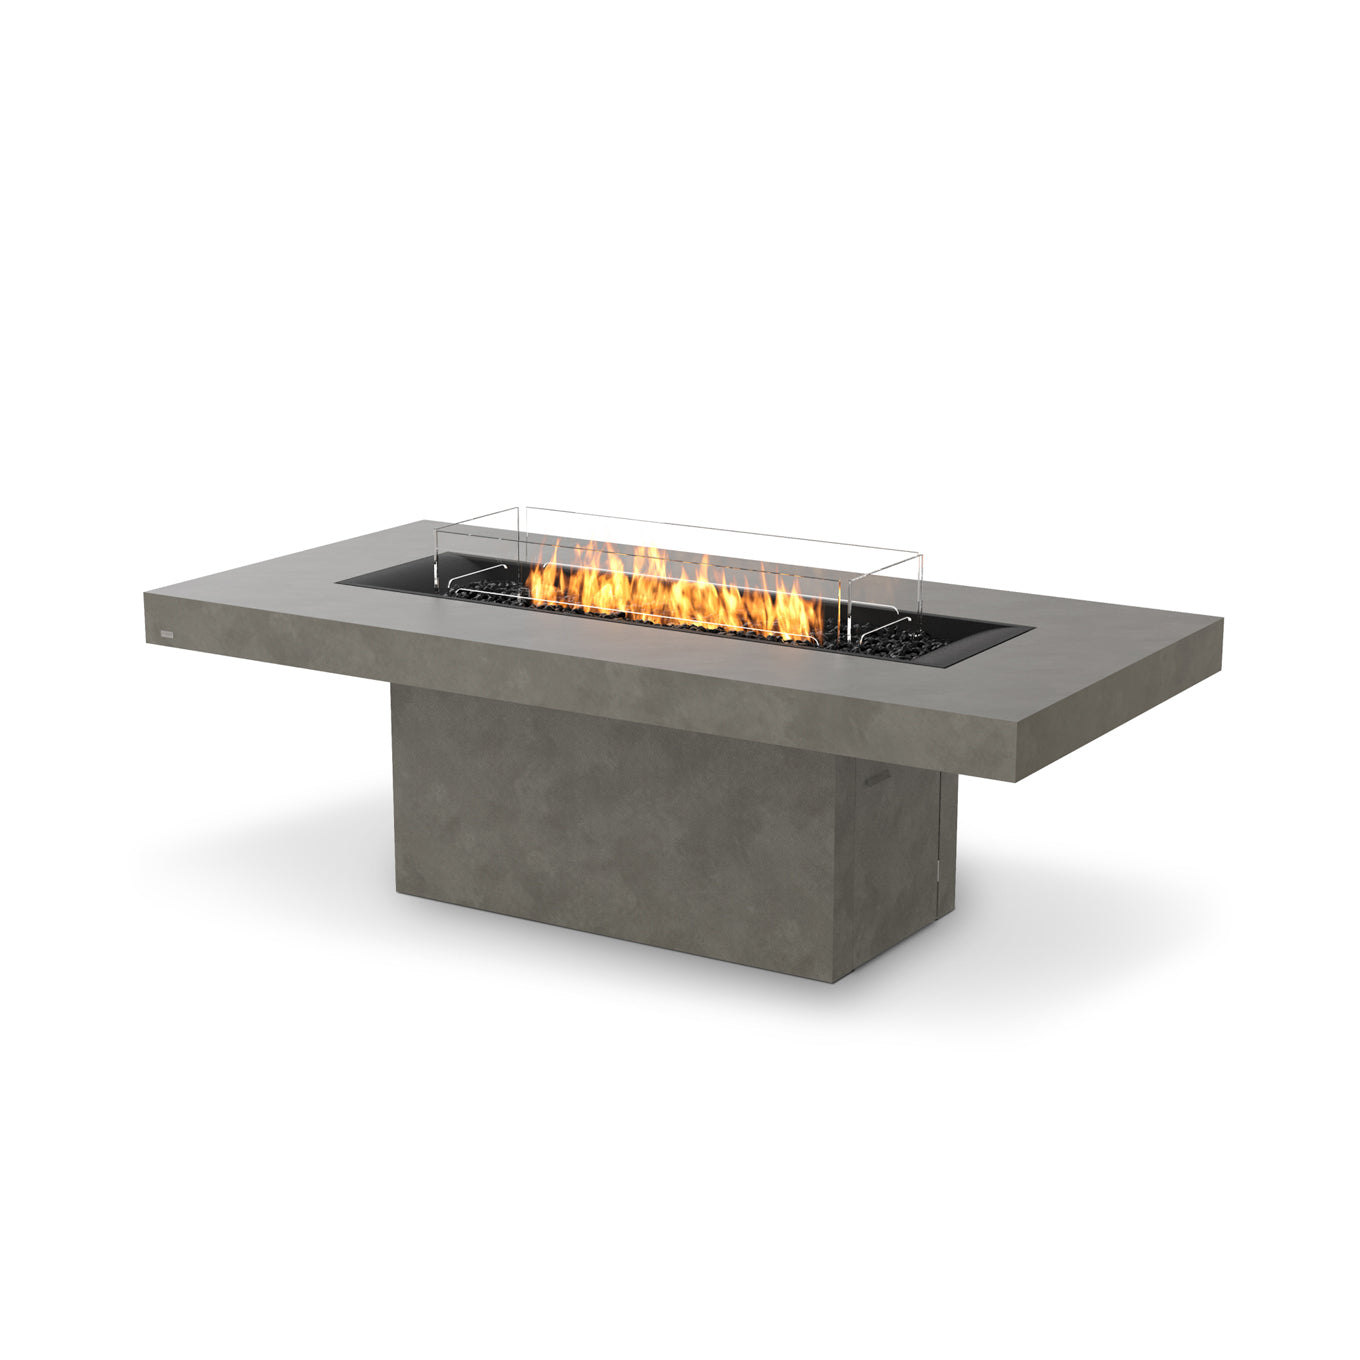 GIN 90 (DINING) FIRE PIT TABLE - NATURAL GAS / LIQUID PROPANE